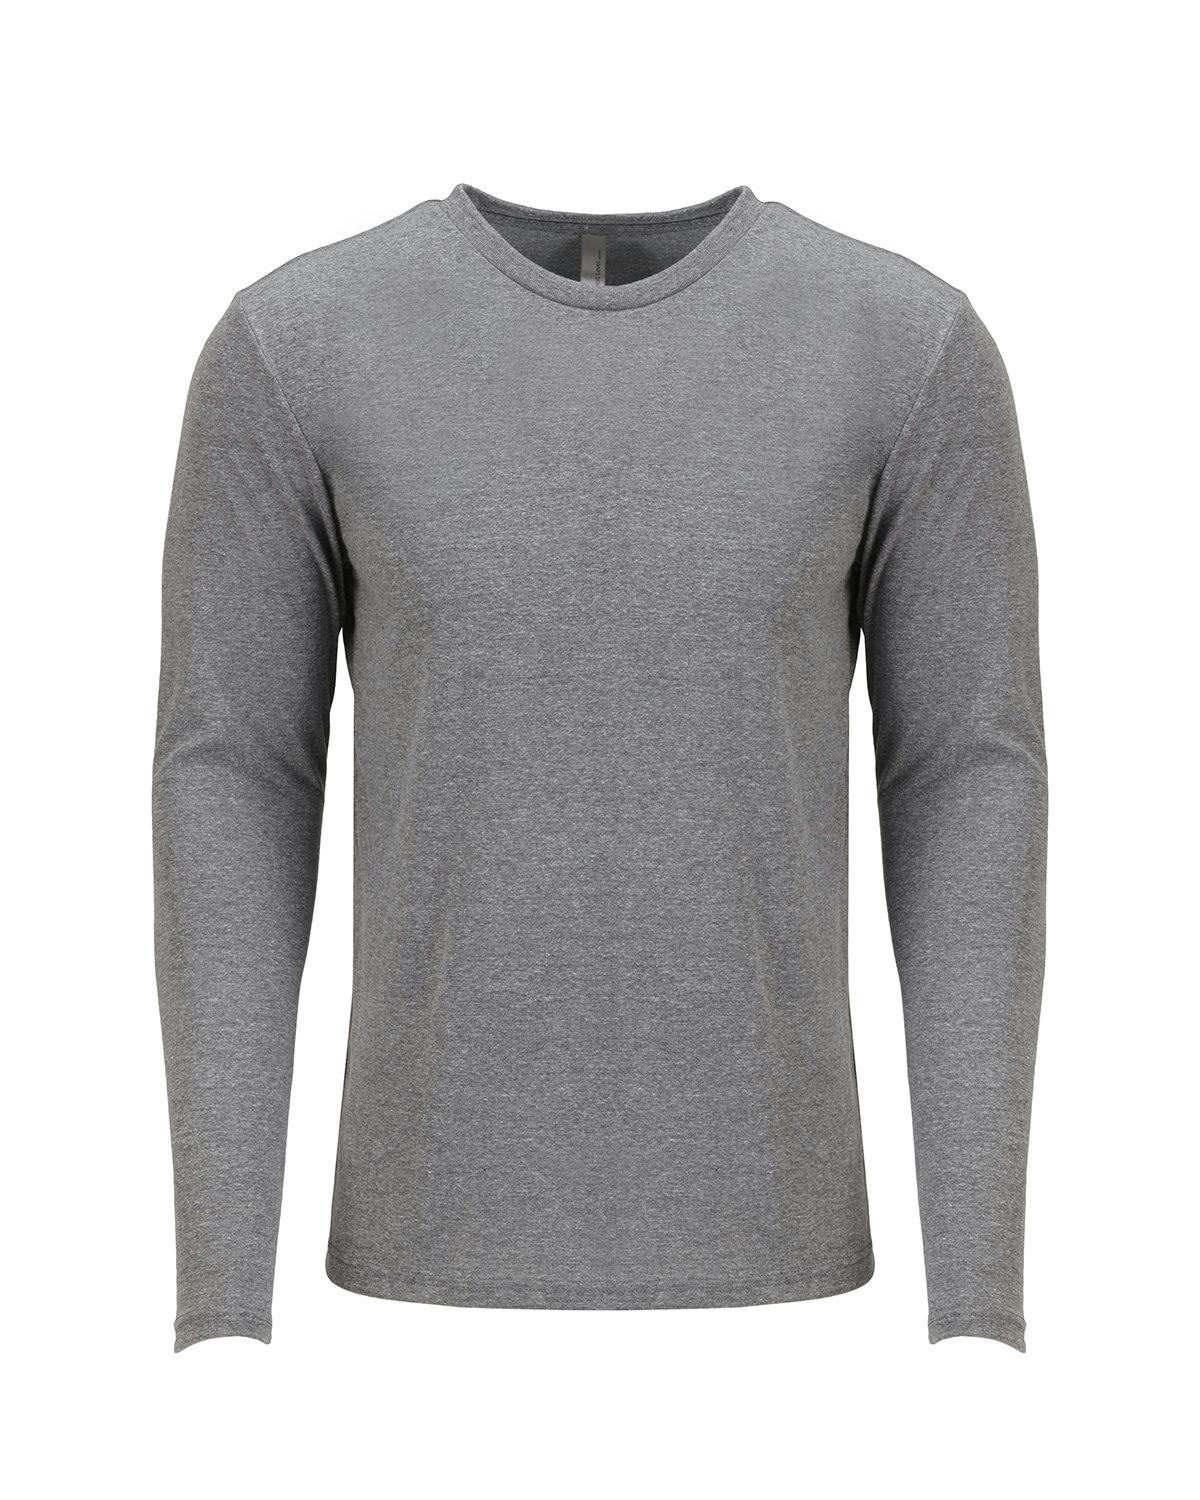 Image for Men's Triblend Long-Sleeve Crew